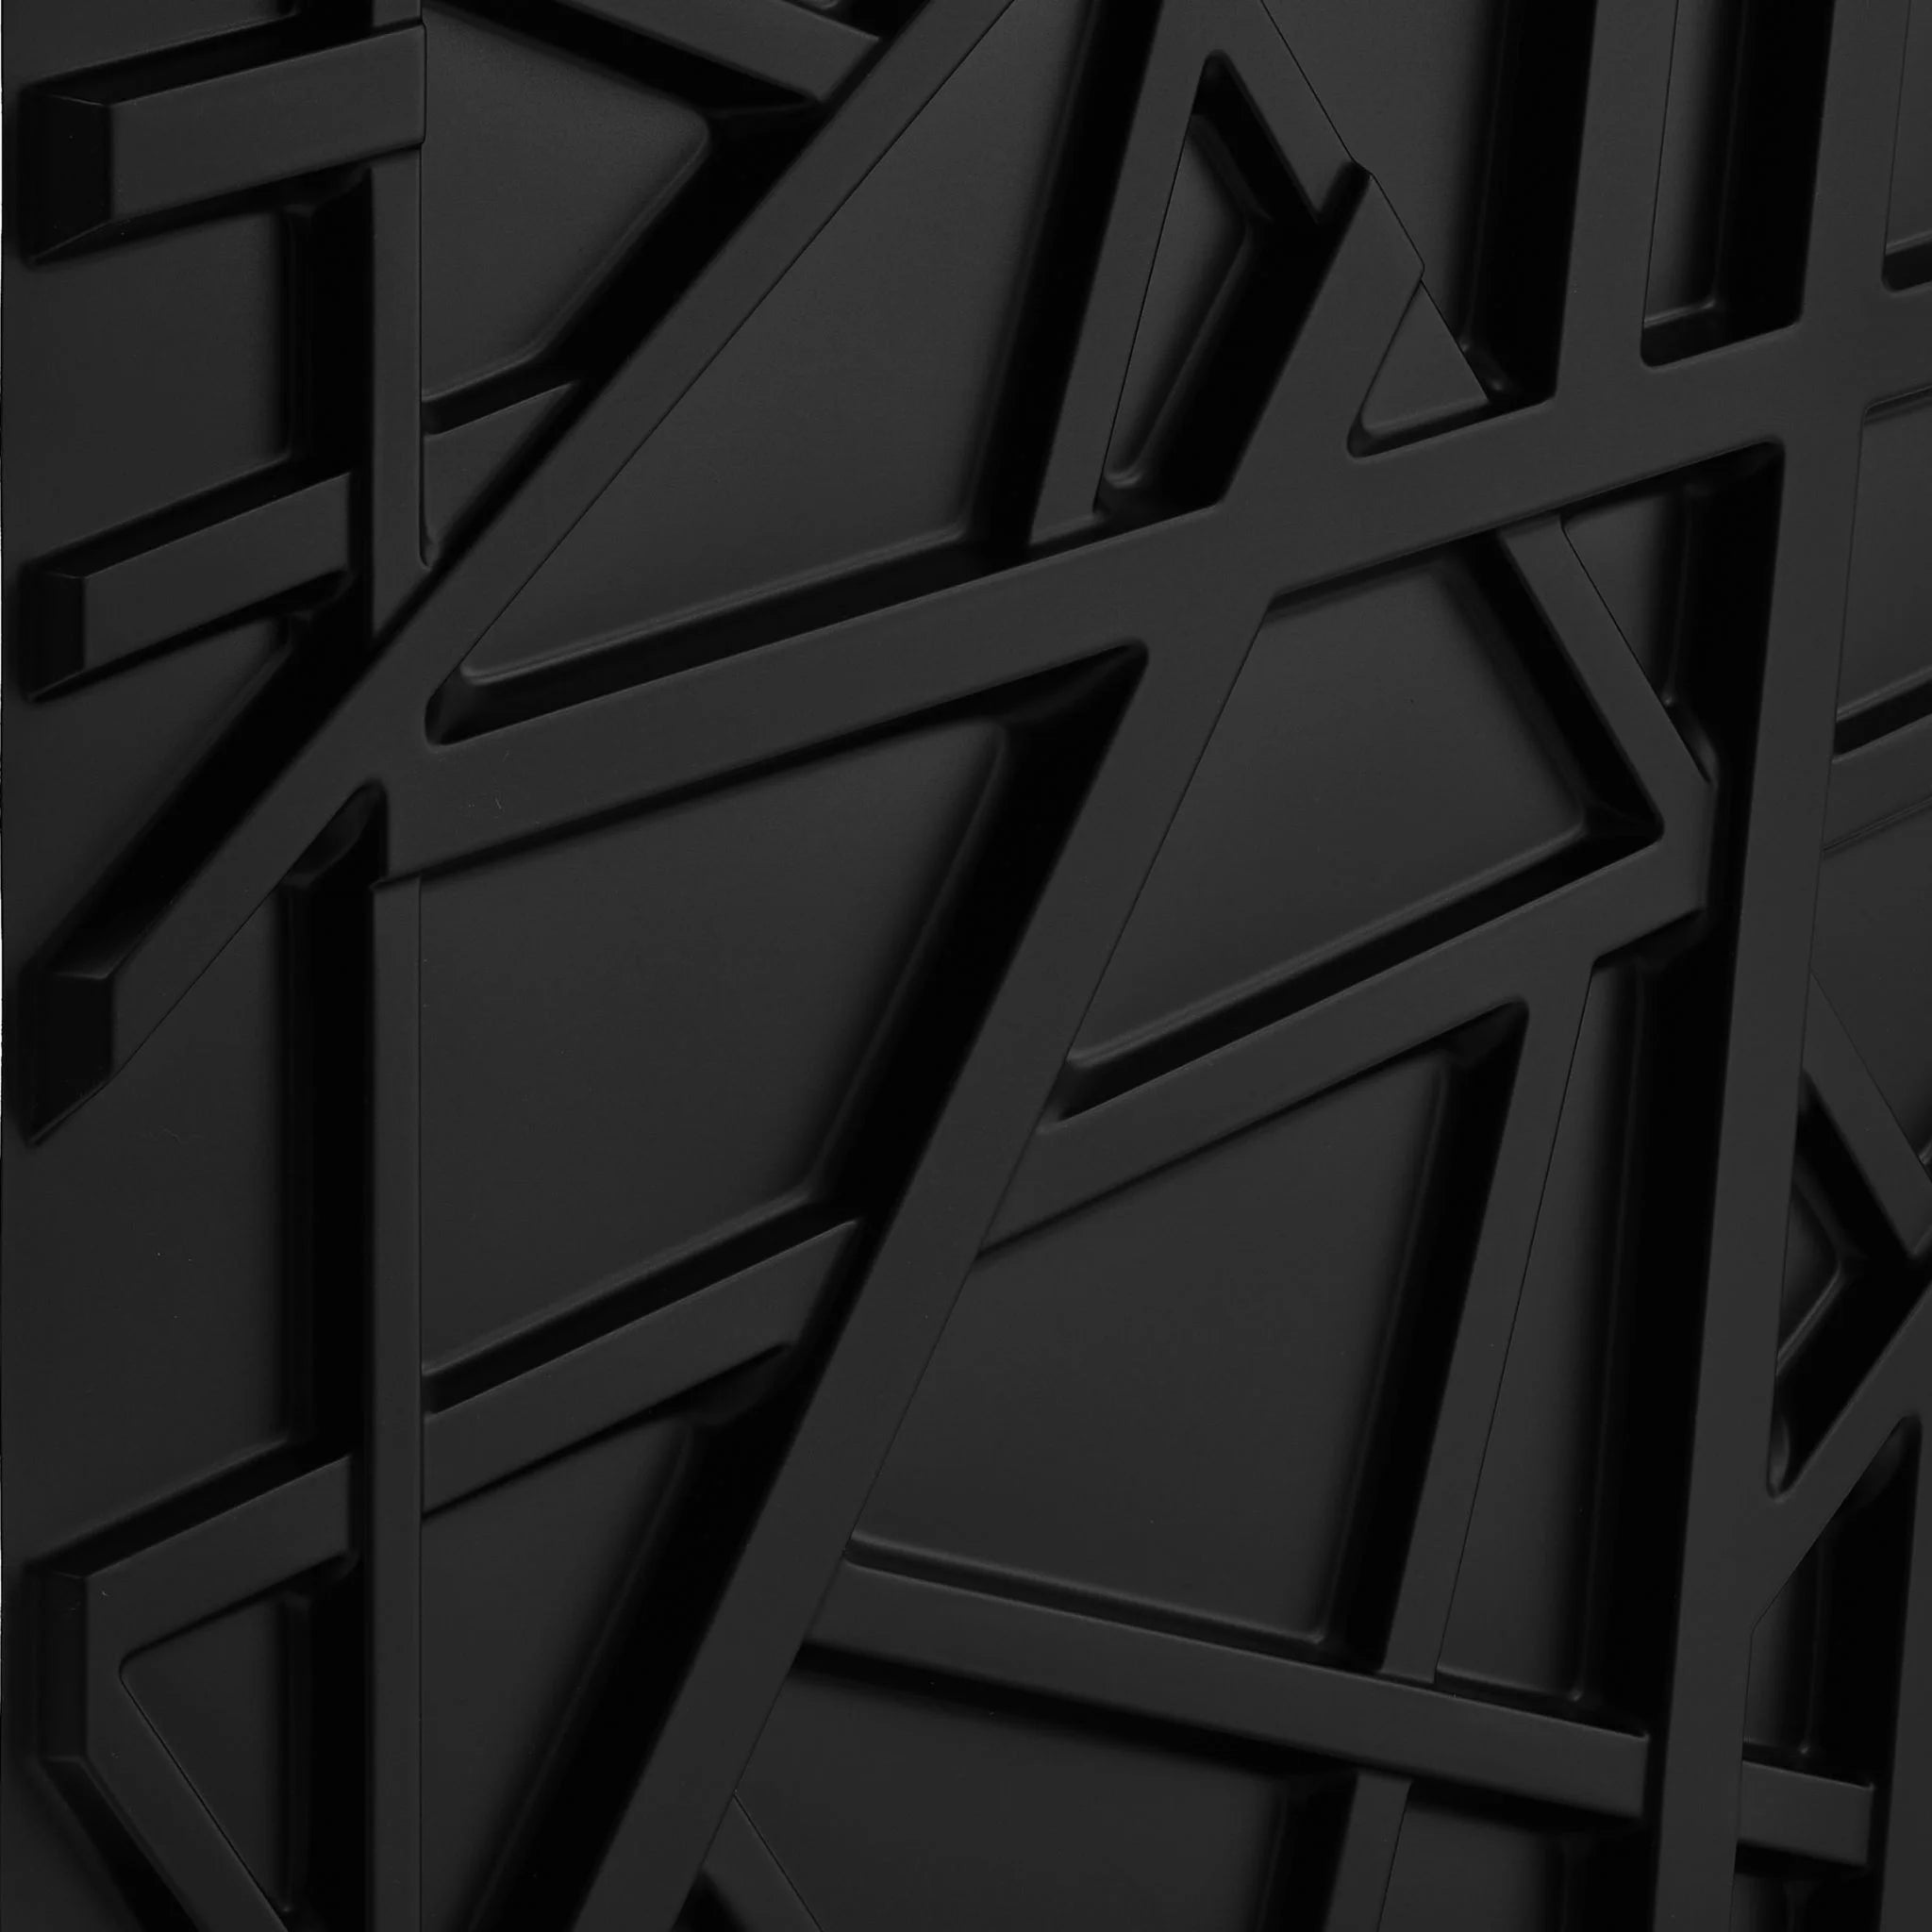 Close-up of black PVC wall panel with crisscross pattern